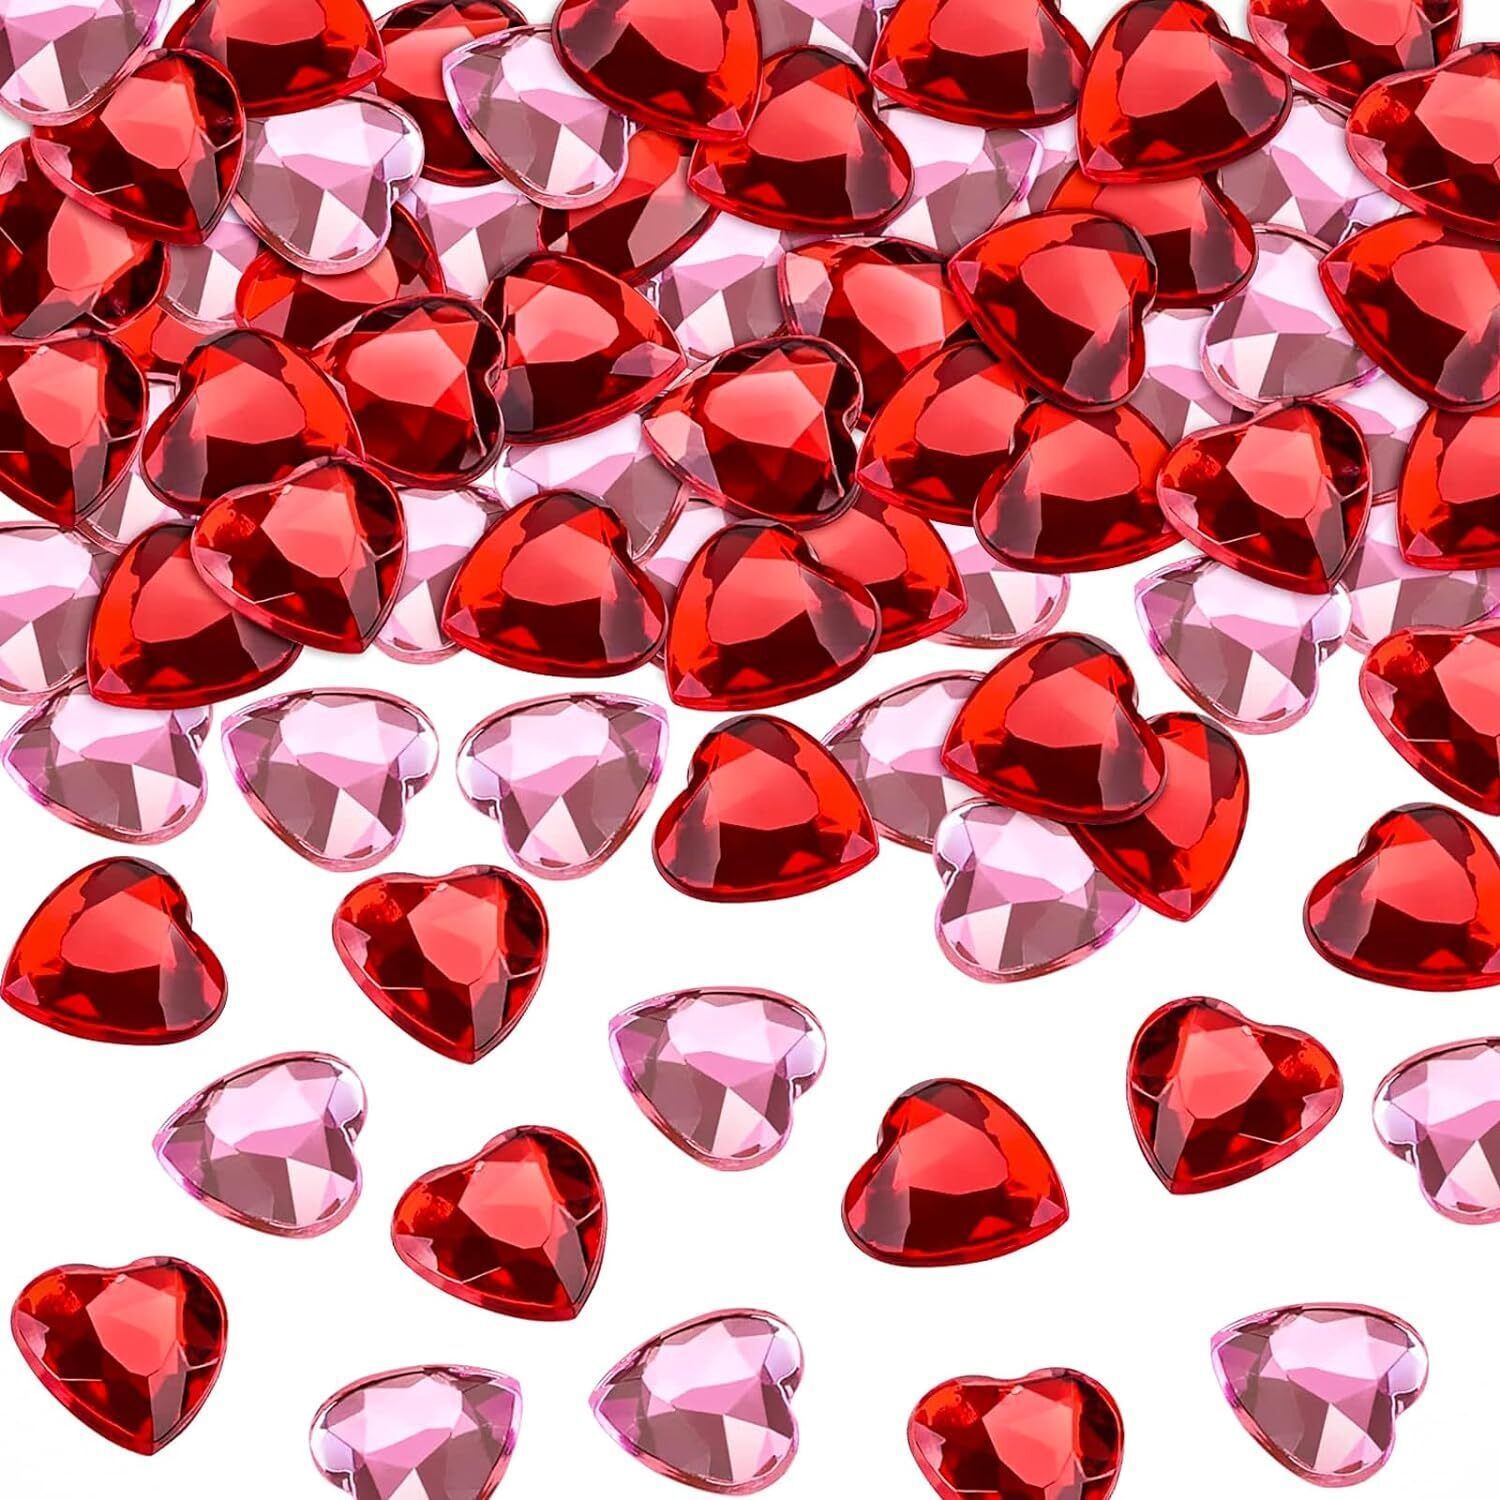 Primary image for SIZGAROOT Red Pink Acrylic Heart Shaped Crystals Gems for Valentines Day Decor